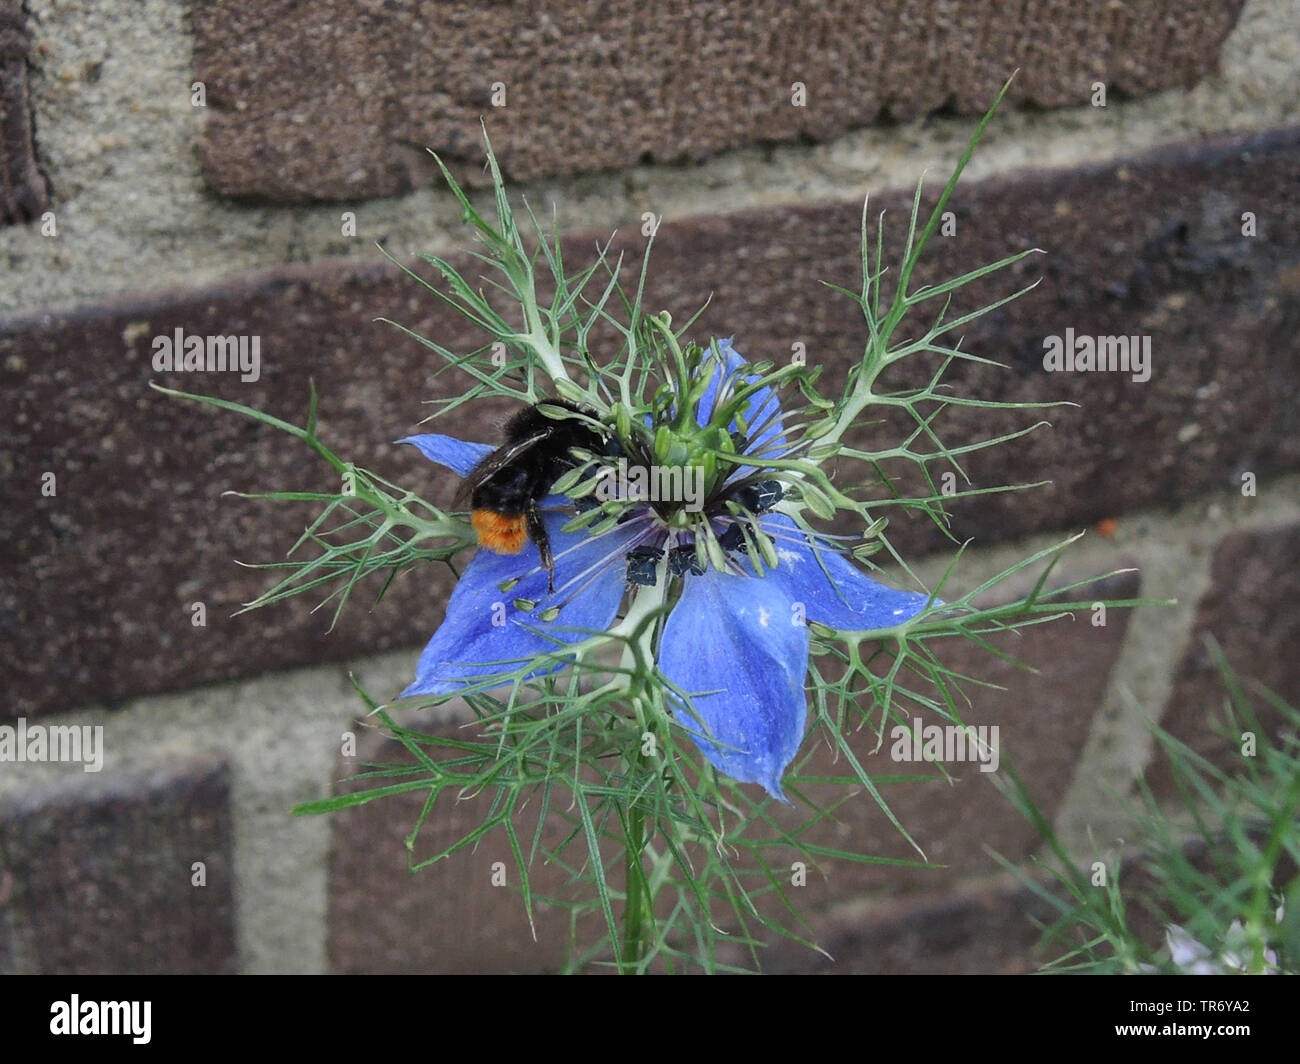 devil-in-the-bush, love-in-a-mist (Nigella damascena), blooming in a garden, with red-tailed bumble bee Stock Photo